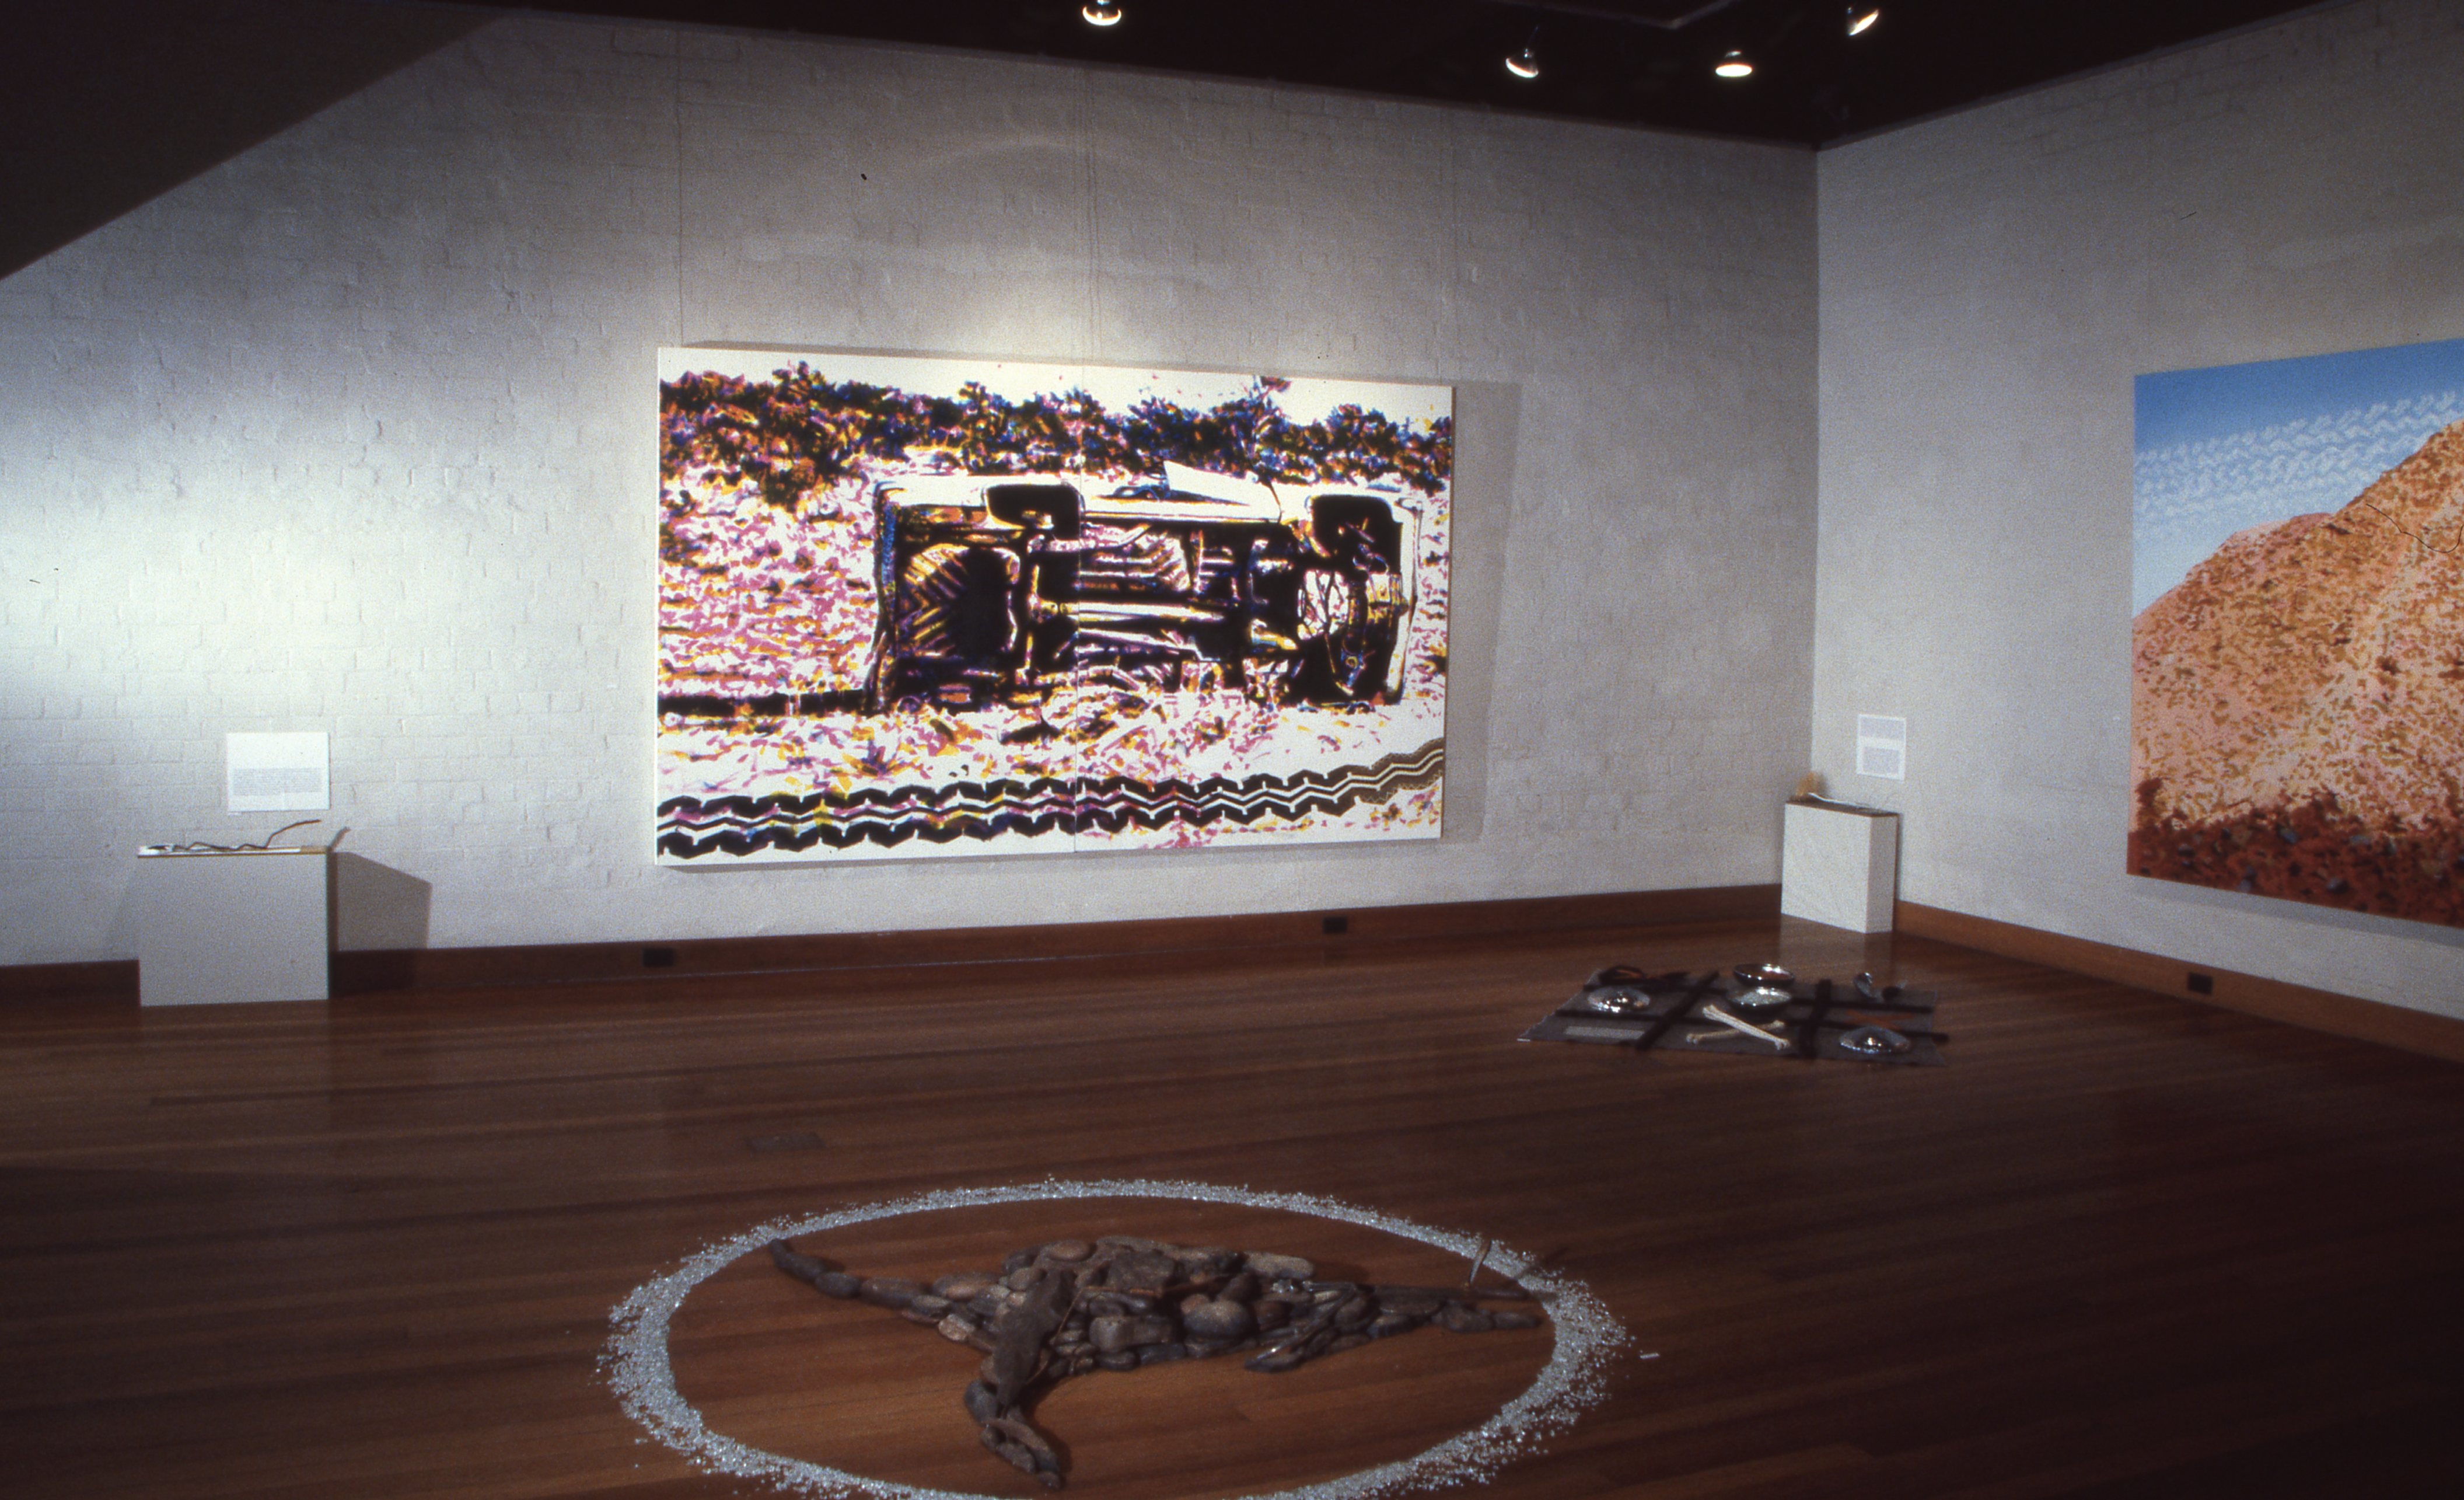 idg_archive_1988_ann_newmarch_as_the_serpent_struggles_david_kerr_humdrum_on_the_highway_003_install.jpg